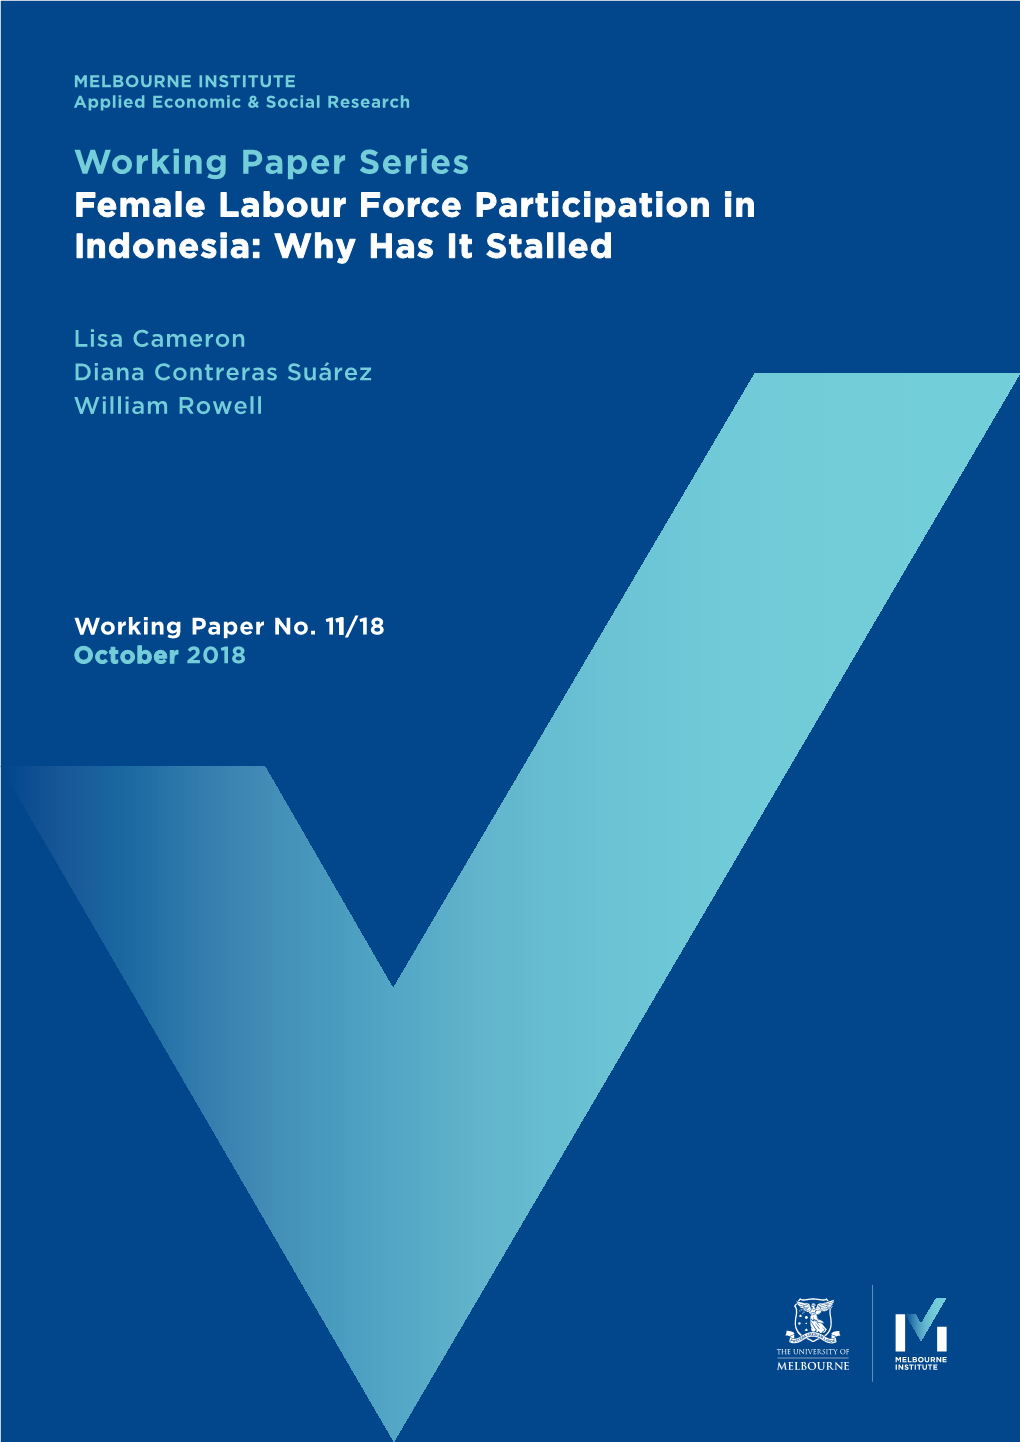 Working Paper Series Female Labour Force Participation in Indonesia: Why Has It Stalled